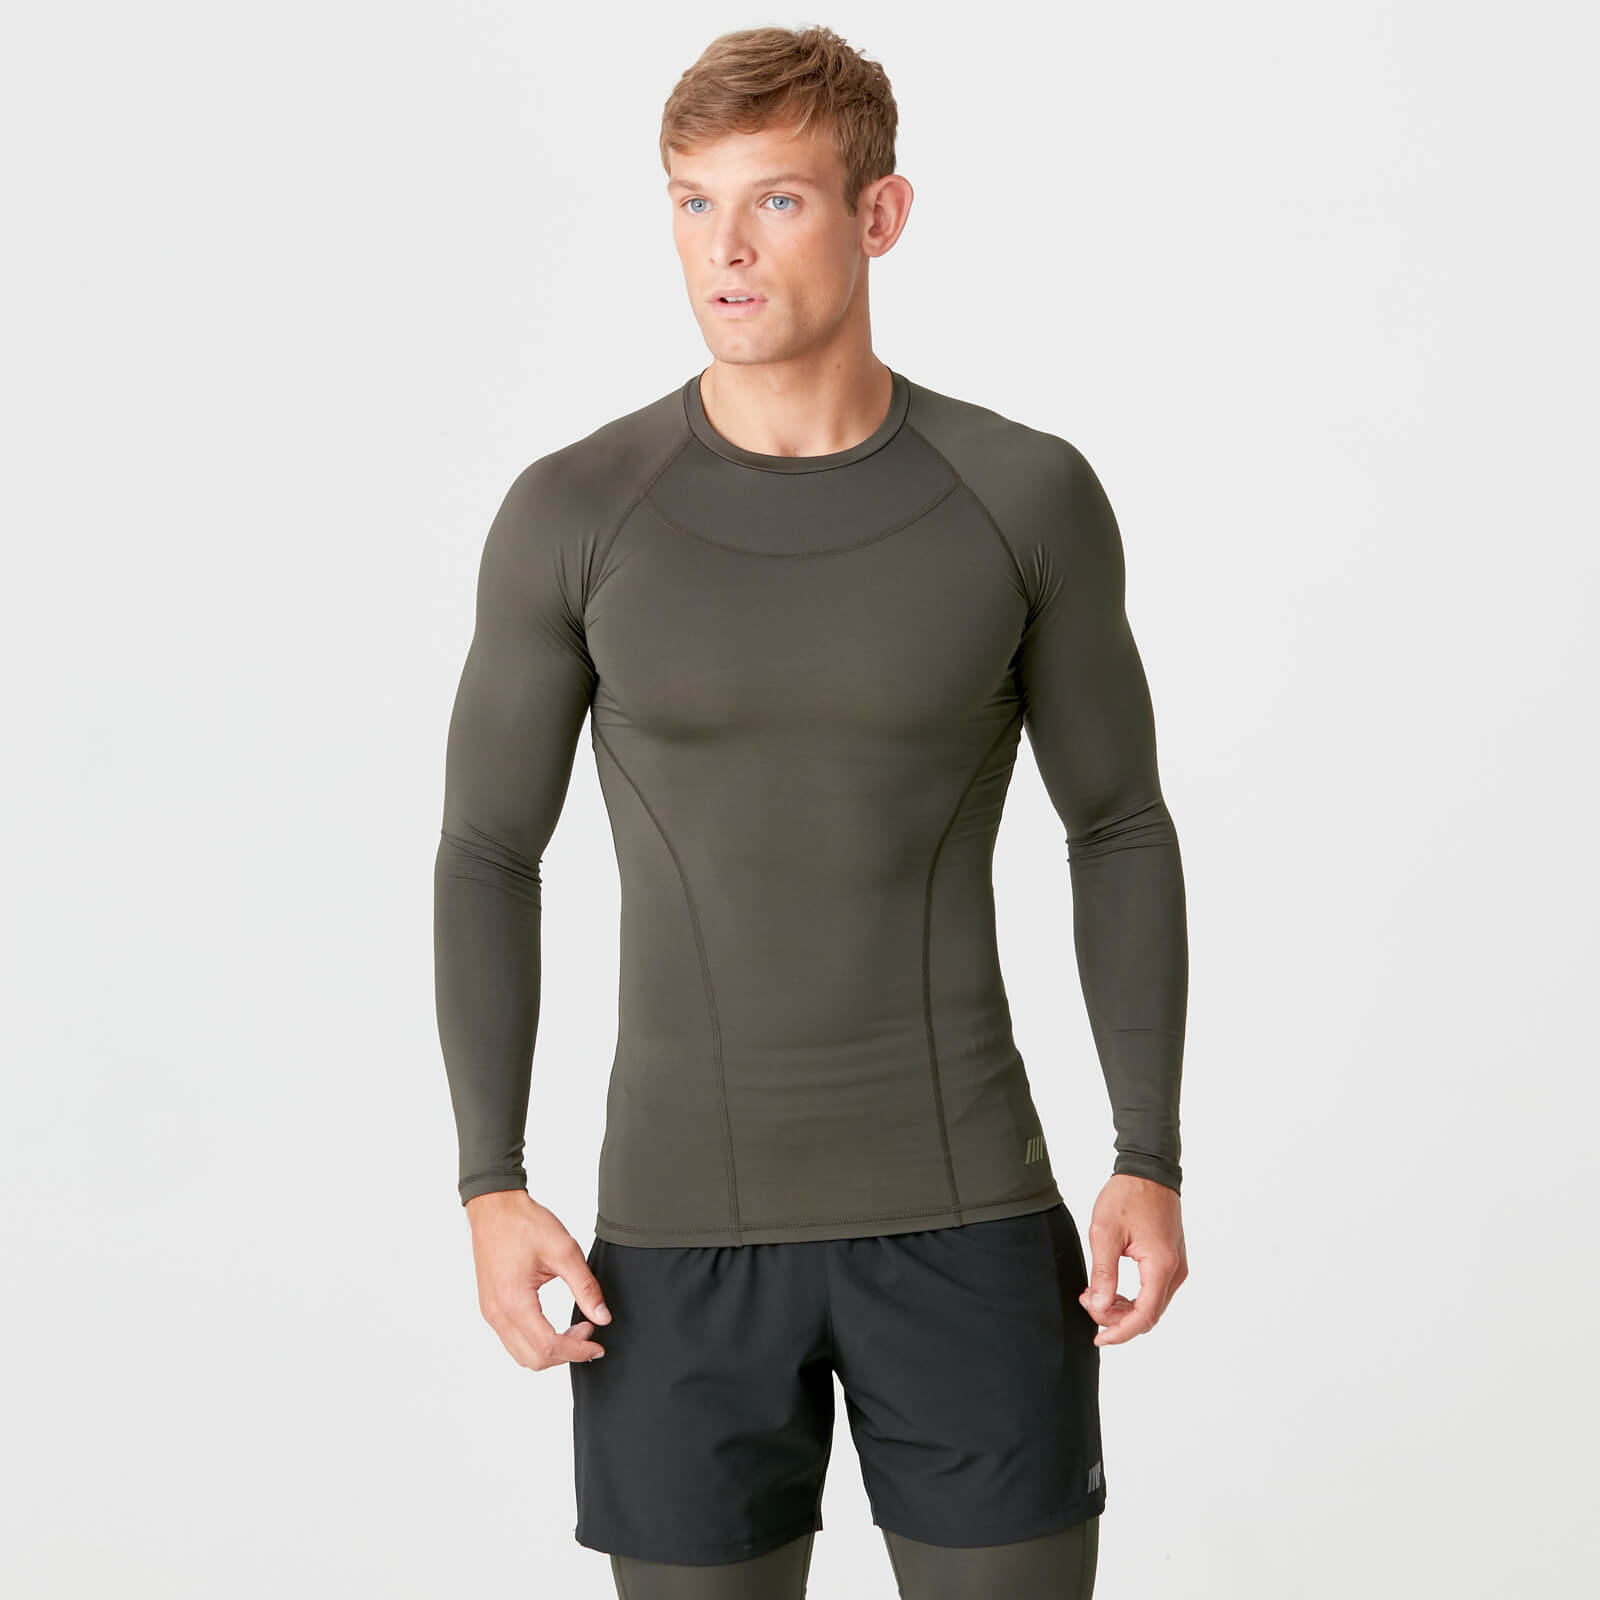 Myprotein Charge Compression Long Sleeve Top - Dark Khaki - S